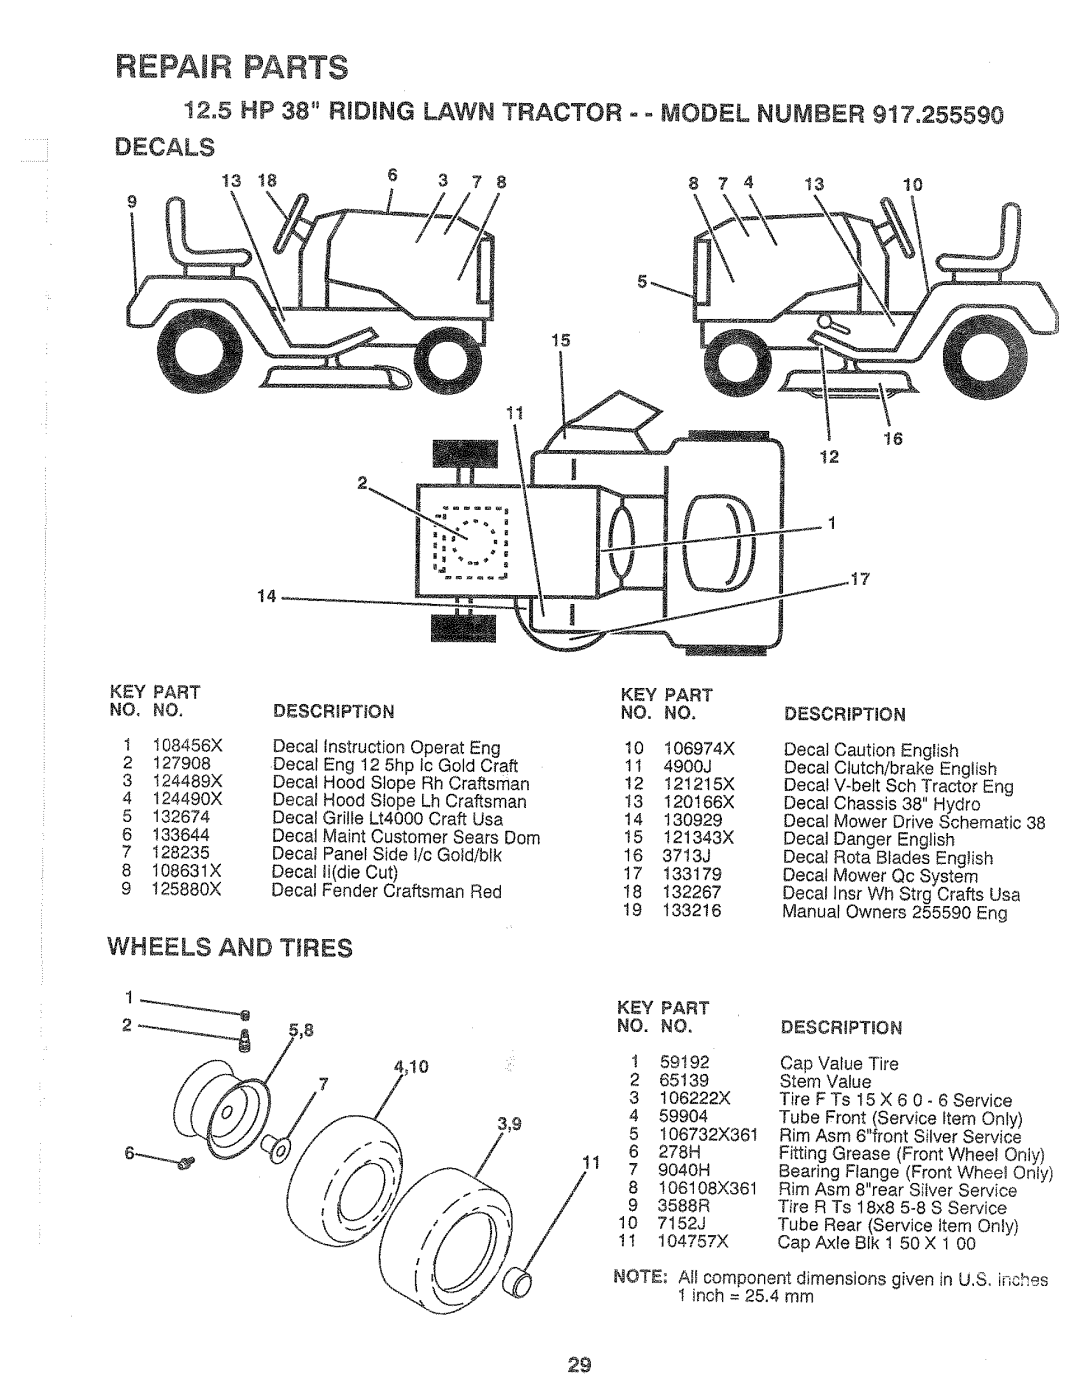 Sears 917.25559 manual REPAmRPARTS, Decals, Wheels And Tires, Part 